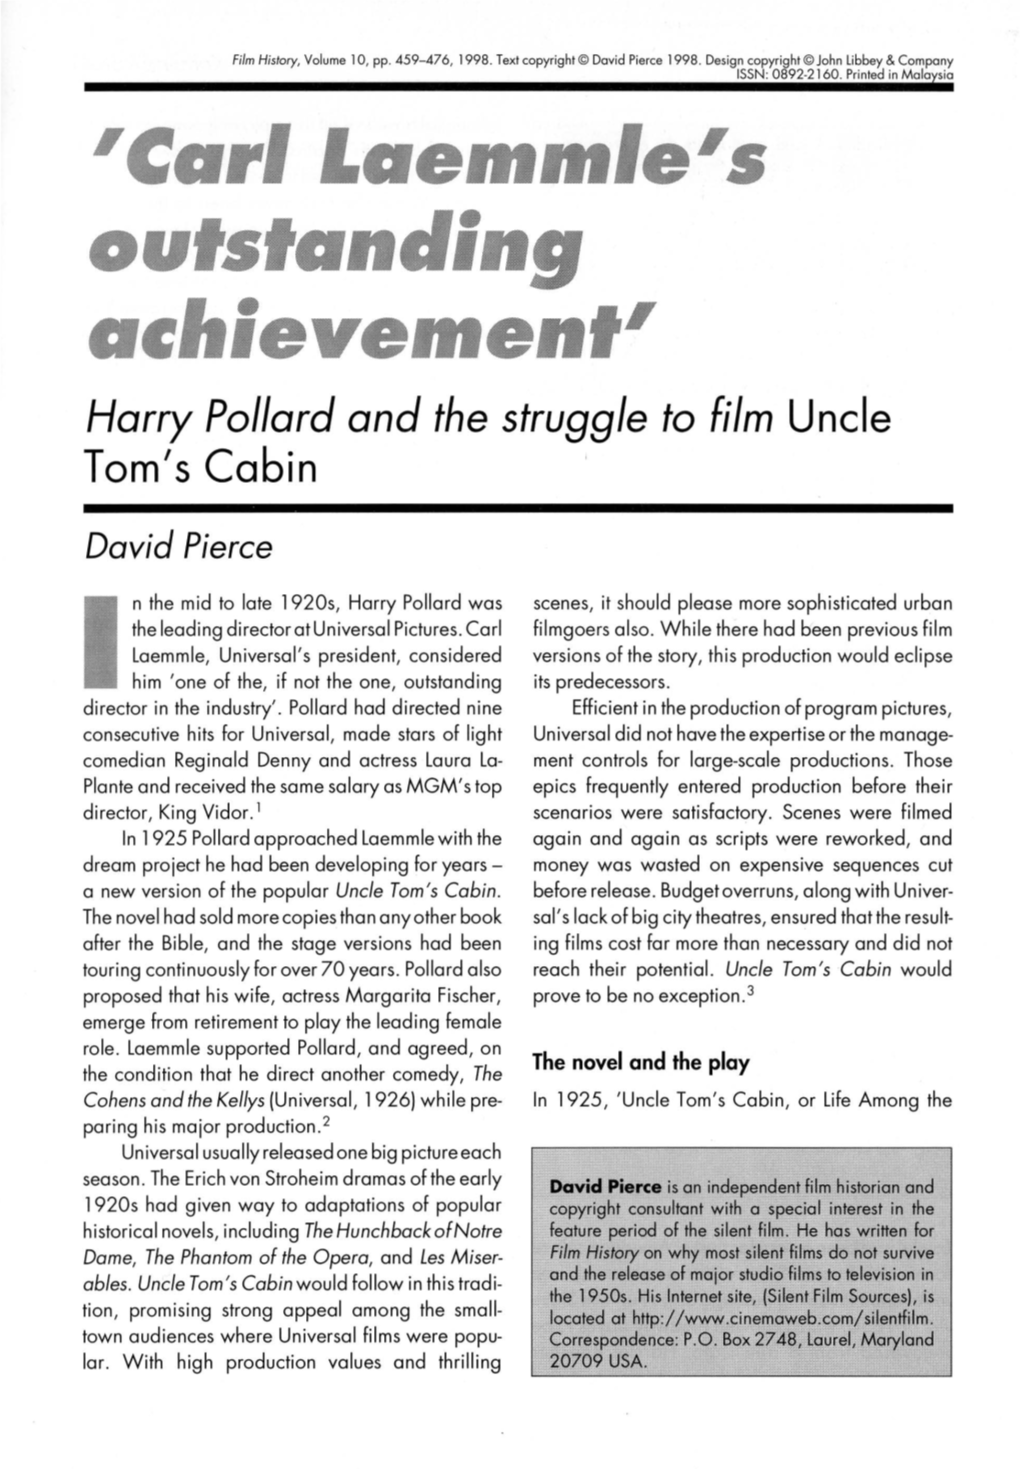 Harry Po/Lord and the Struggle to Film Uncle Tom's Cabin